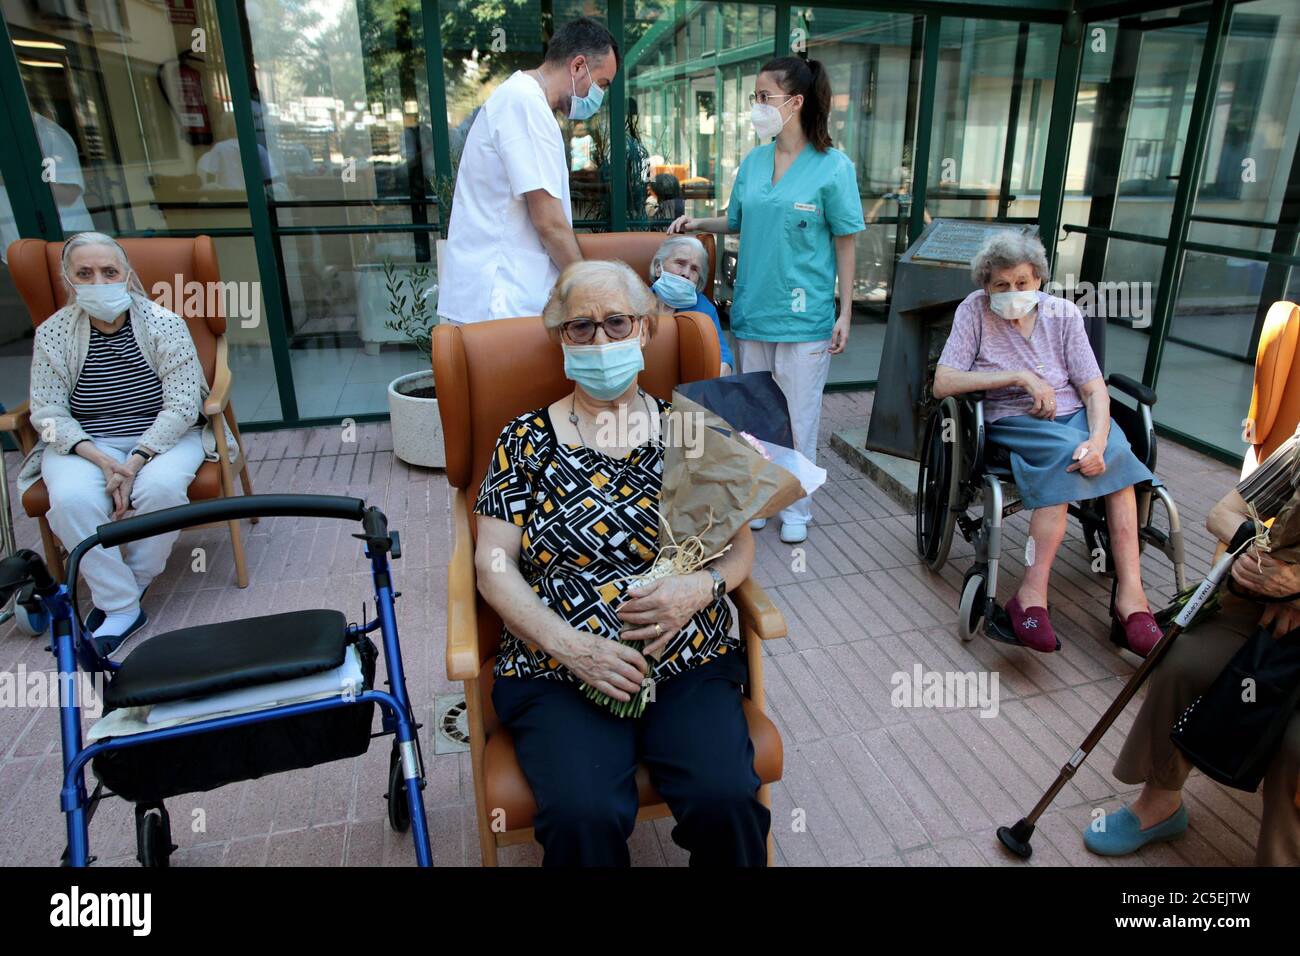 Madrid, Spain; 02/07/2020.- I had Covid-19.Juan Elías, a health worker in a nursing home in Ciempozuelos, Madrid, sick with coronavirus on March 16, 2020, presented fatigue, high fever, diarrhea, breathing problems and anosmia. He was treated via telephone and was instructed not to go to the hospital unless he had great trouble breathing. He was admitted but did not need intubation at the end of June, he returns to his job and does not have major sequels. Fear was what else he had and the desire that nobody go through the same, continues with a little anosmia. Photo: Juan Carlos Rojas/Picture Stock Photo